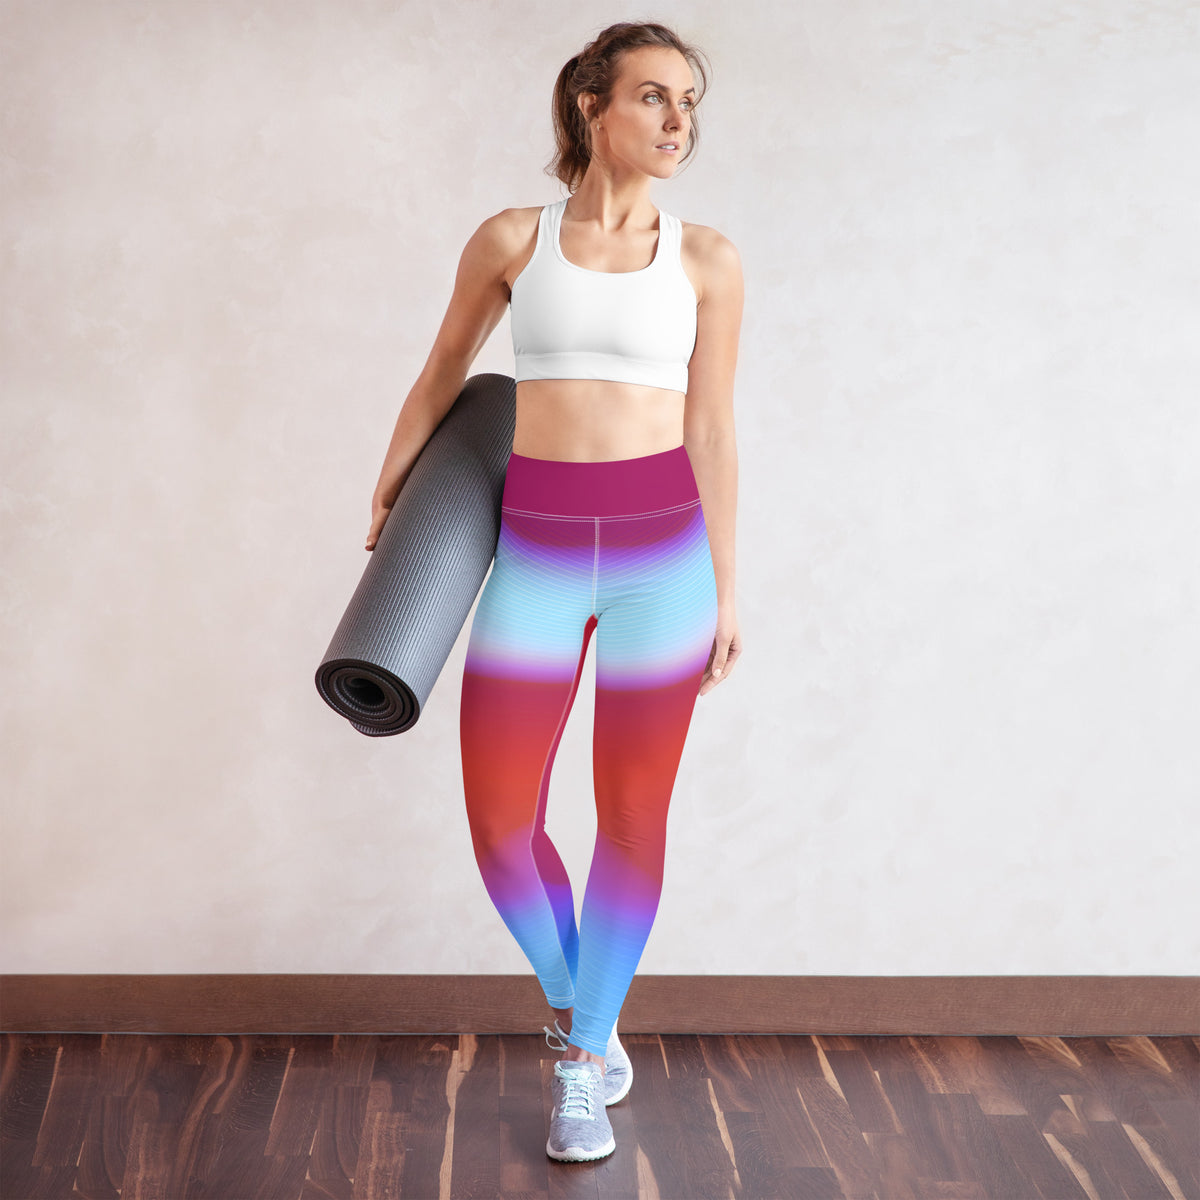 Practicing a tranquil yoga pose in the Celestial Tide Wavy Gradient Yoga Leggings.